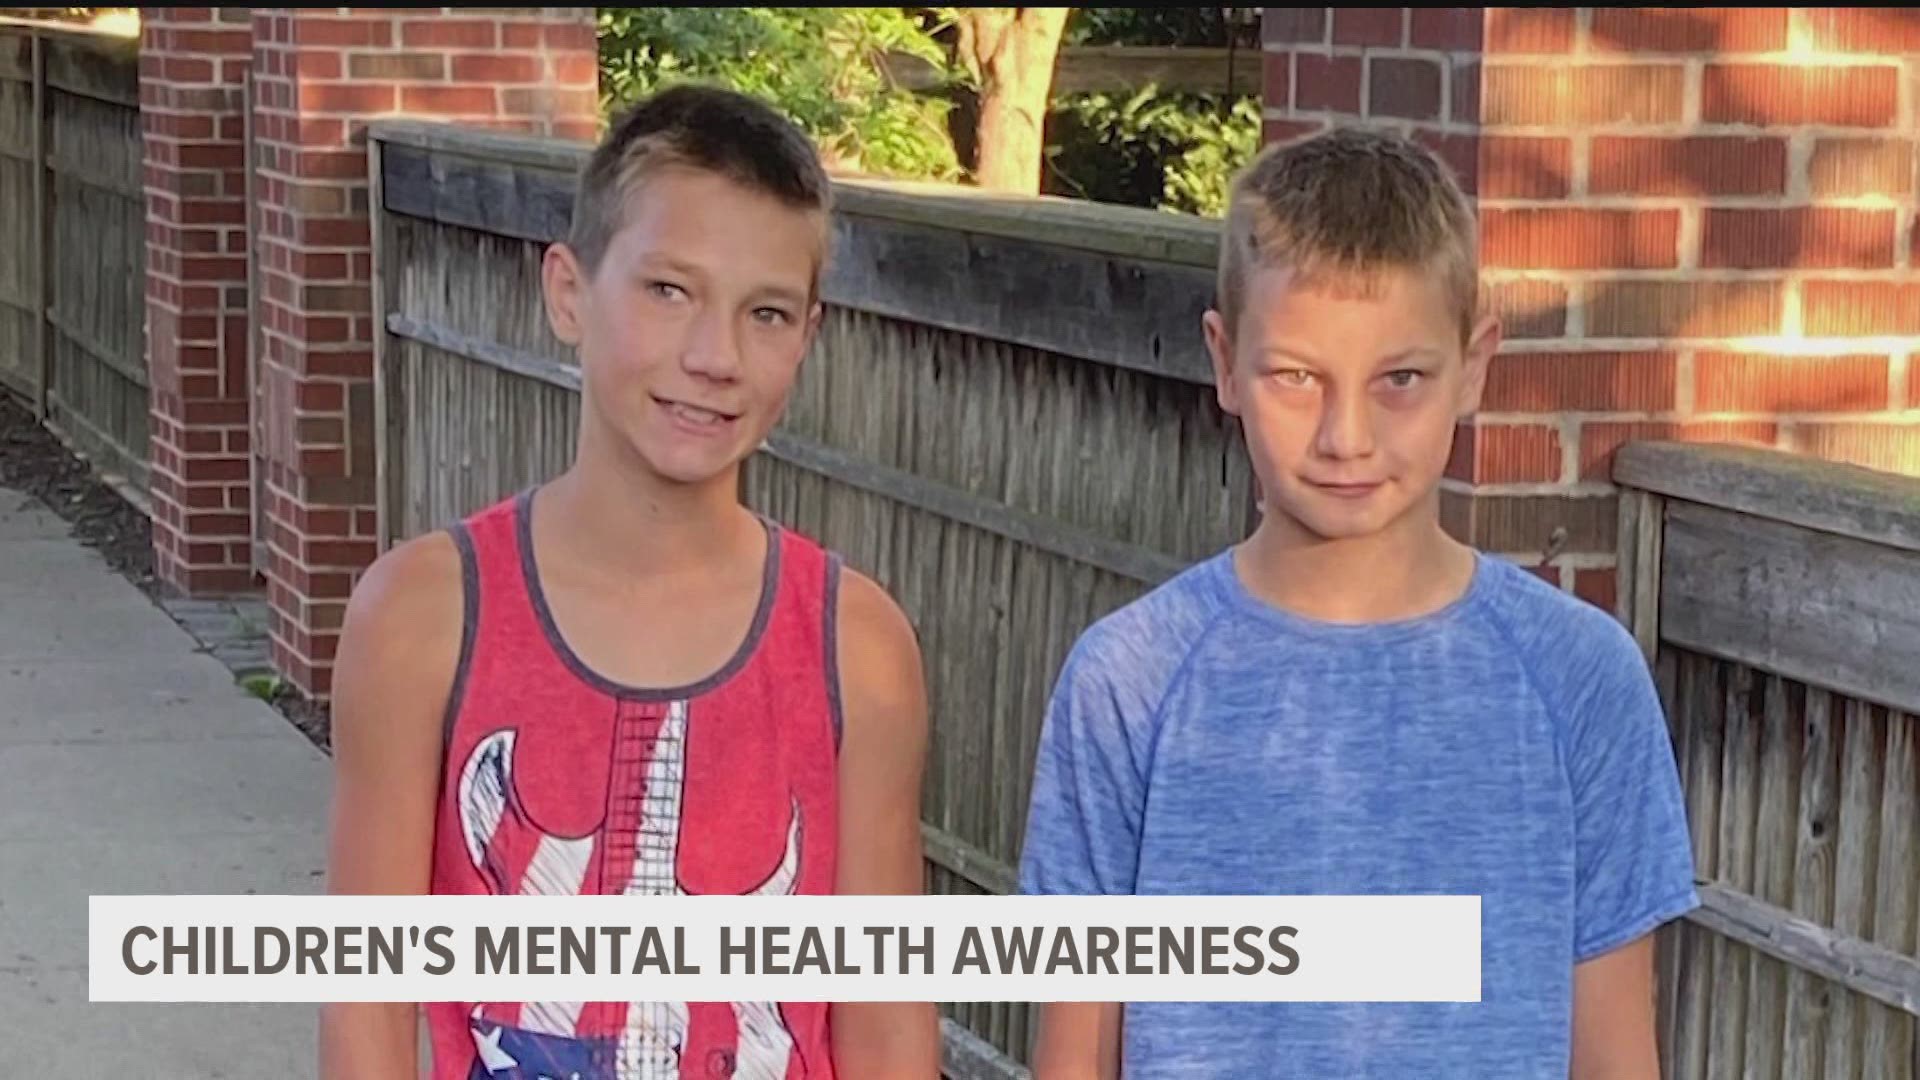 Parents told Local 5 there needs to more resources for their children's mental health.